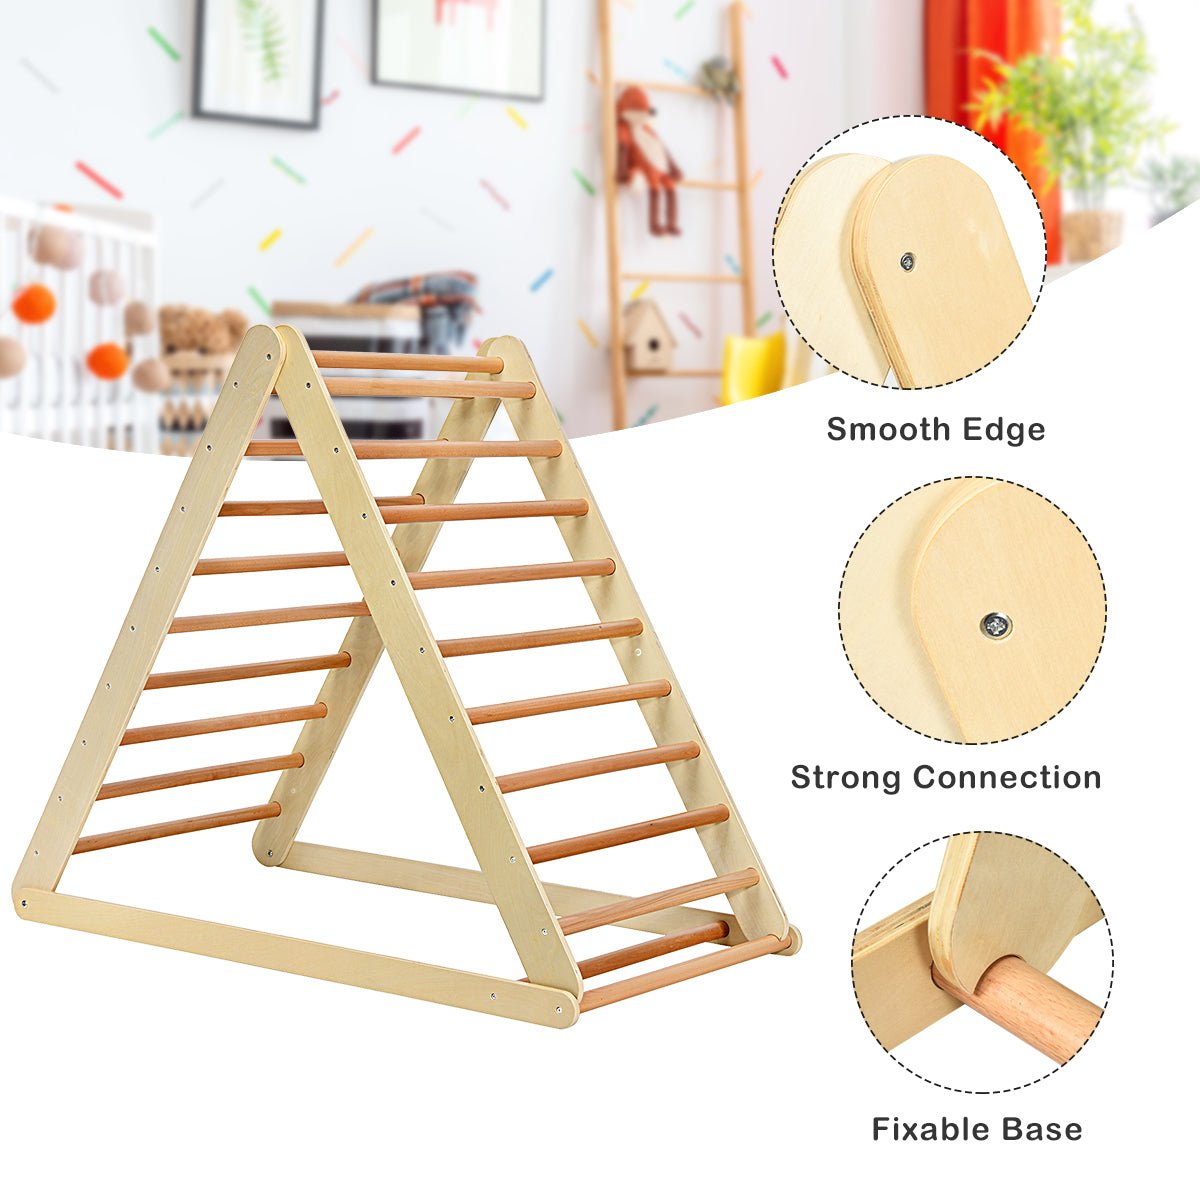 Safety-Focused Wooden Triangle Ladder - Natural Play with Peace of Mind